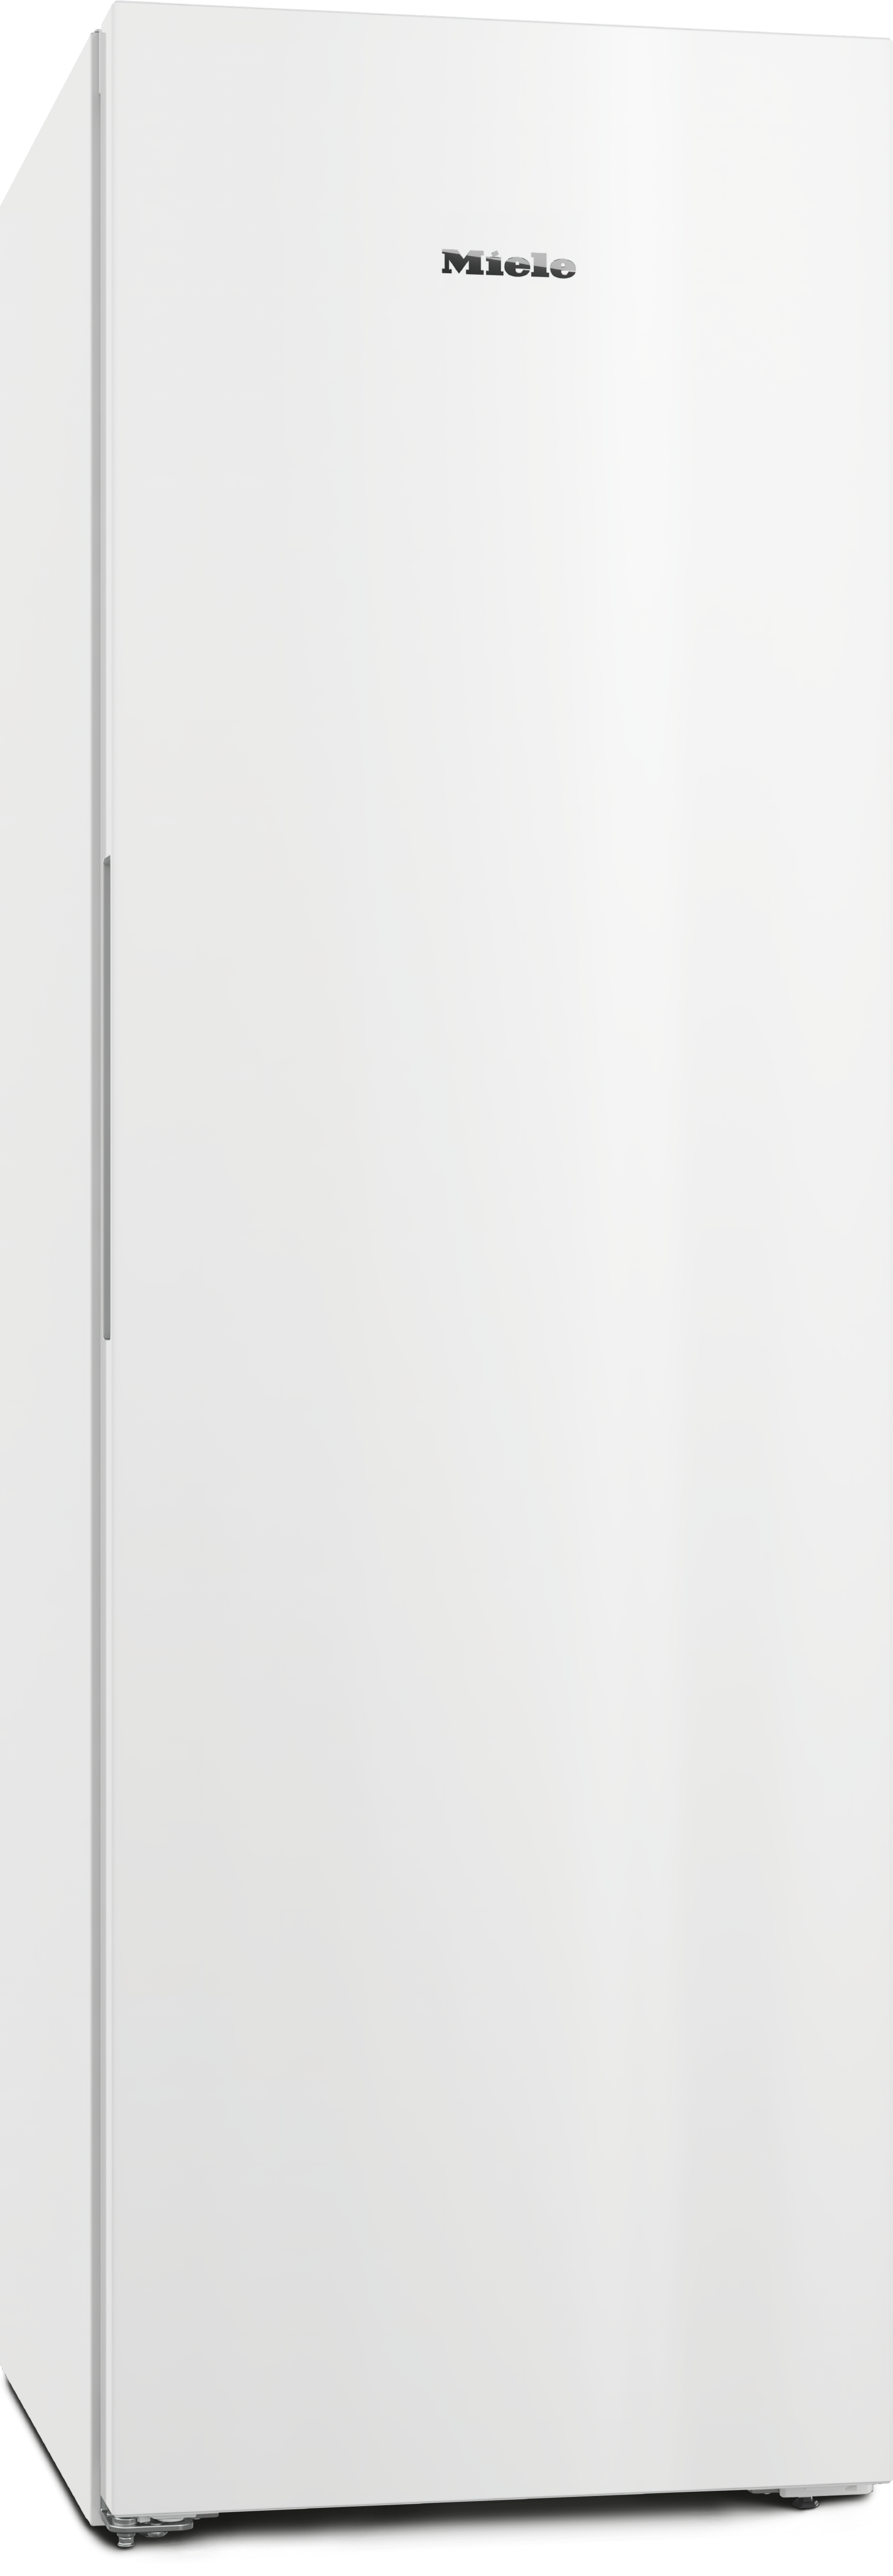 Refrigeration - FNS 4382 D White - 1